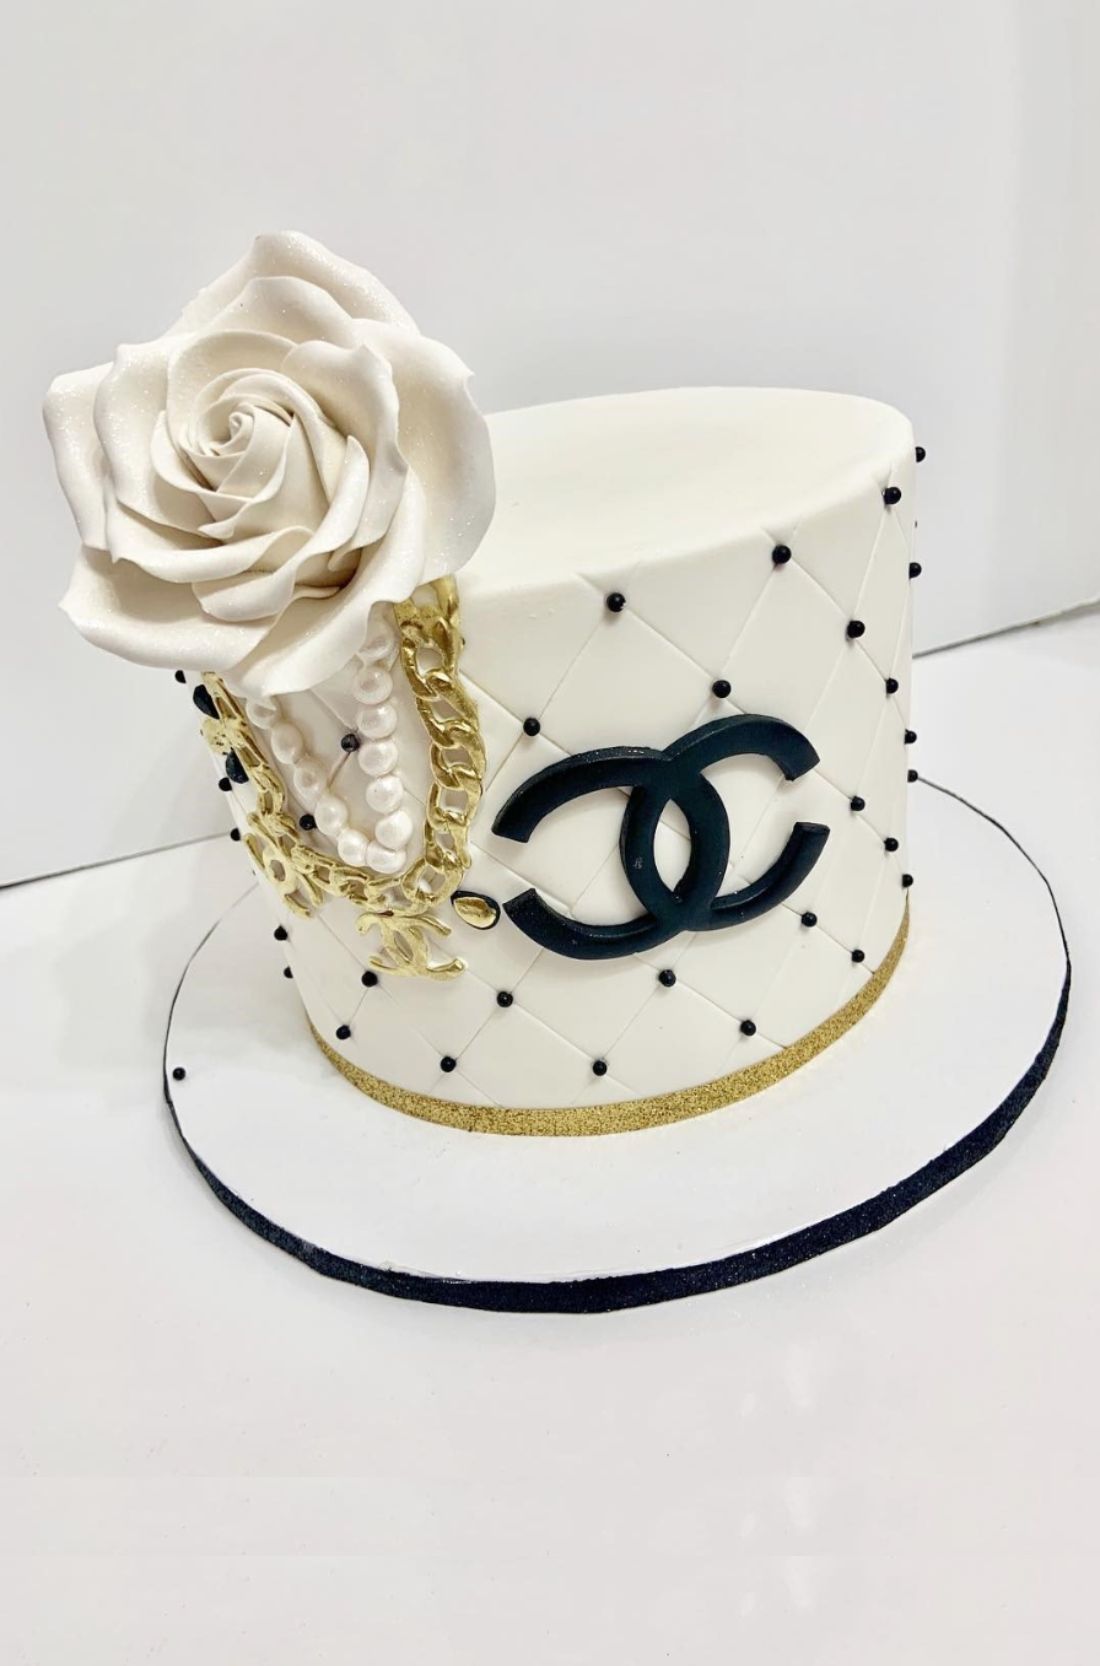 A visually stunning Chanel cake, adorned with quilted patterns and the iconic double-C logo, showcasing the epitome of culinary elegance and high fashion.